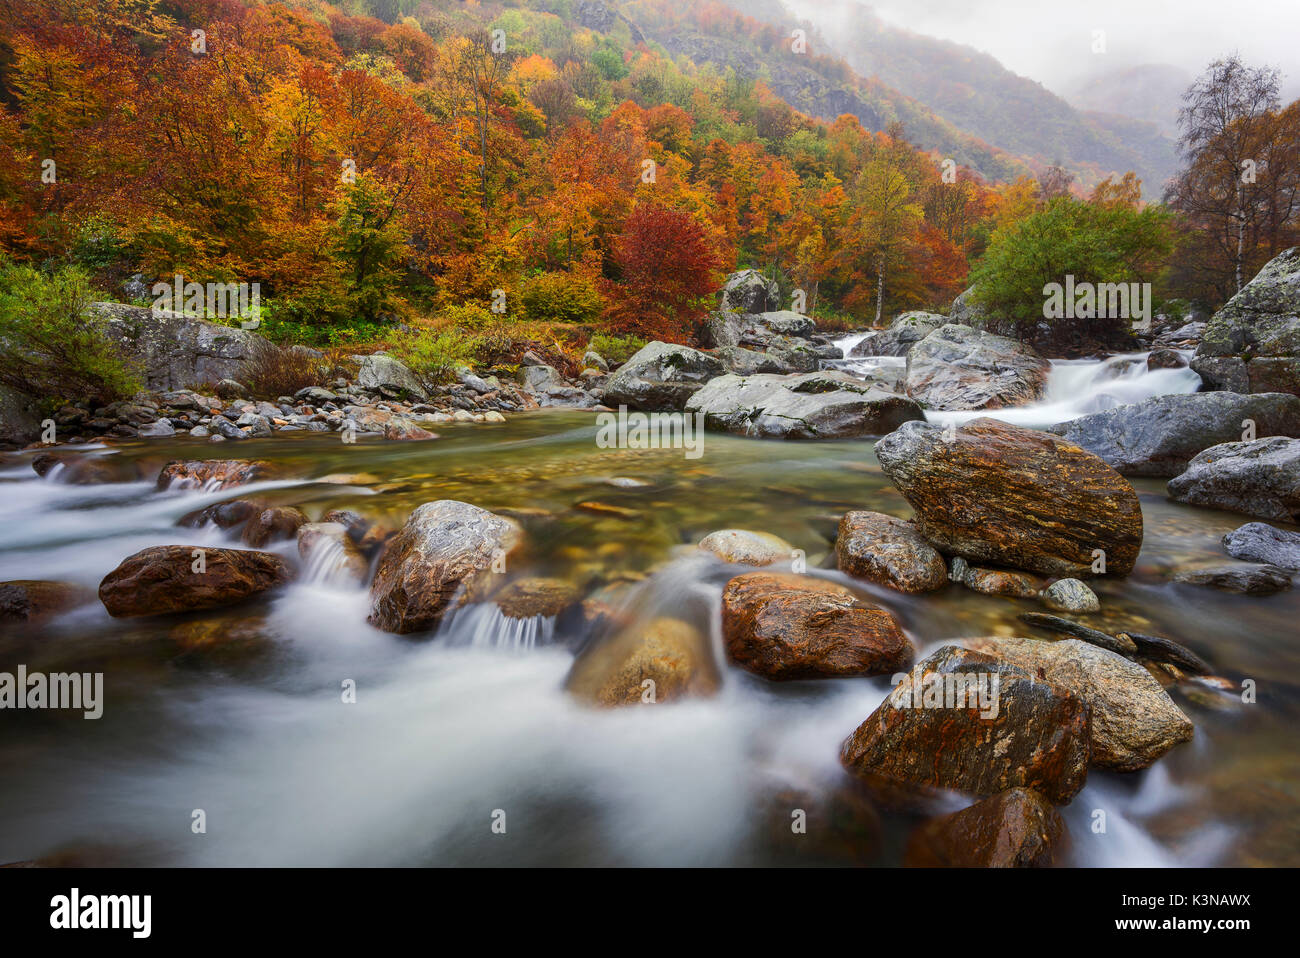 Italy, Piedmont, Cuneo District, Gesso Valley, Alpi Marittime Natural Park, autumnal colors in the Gesso Valley Stock Photo